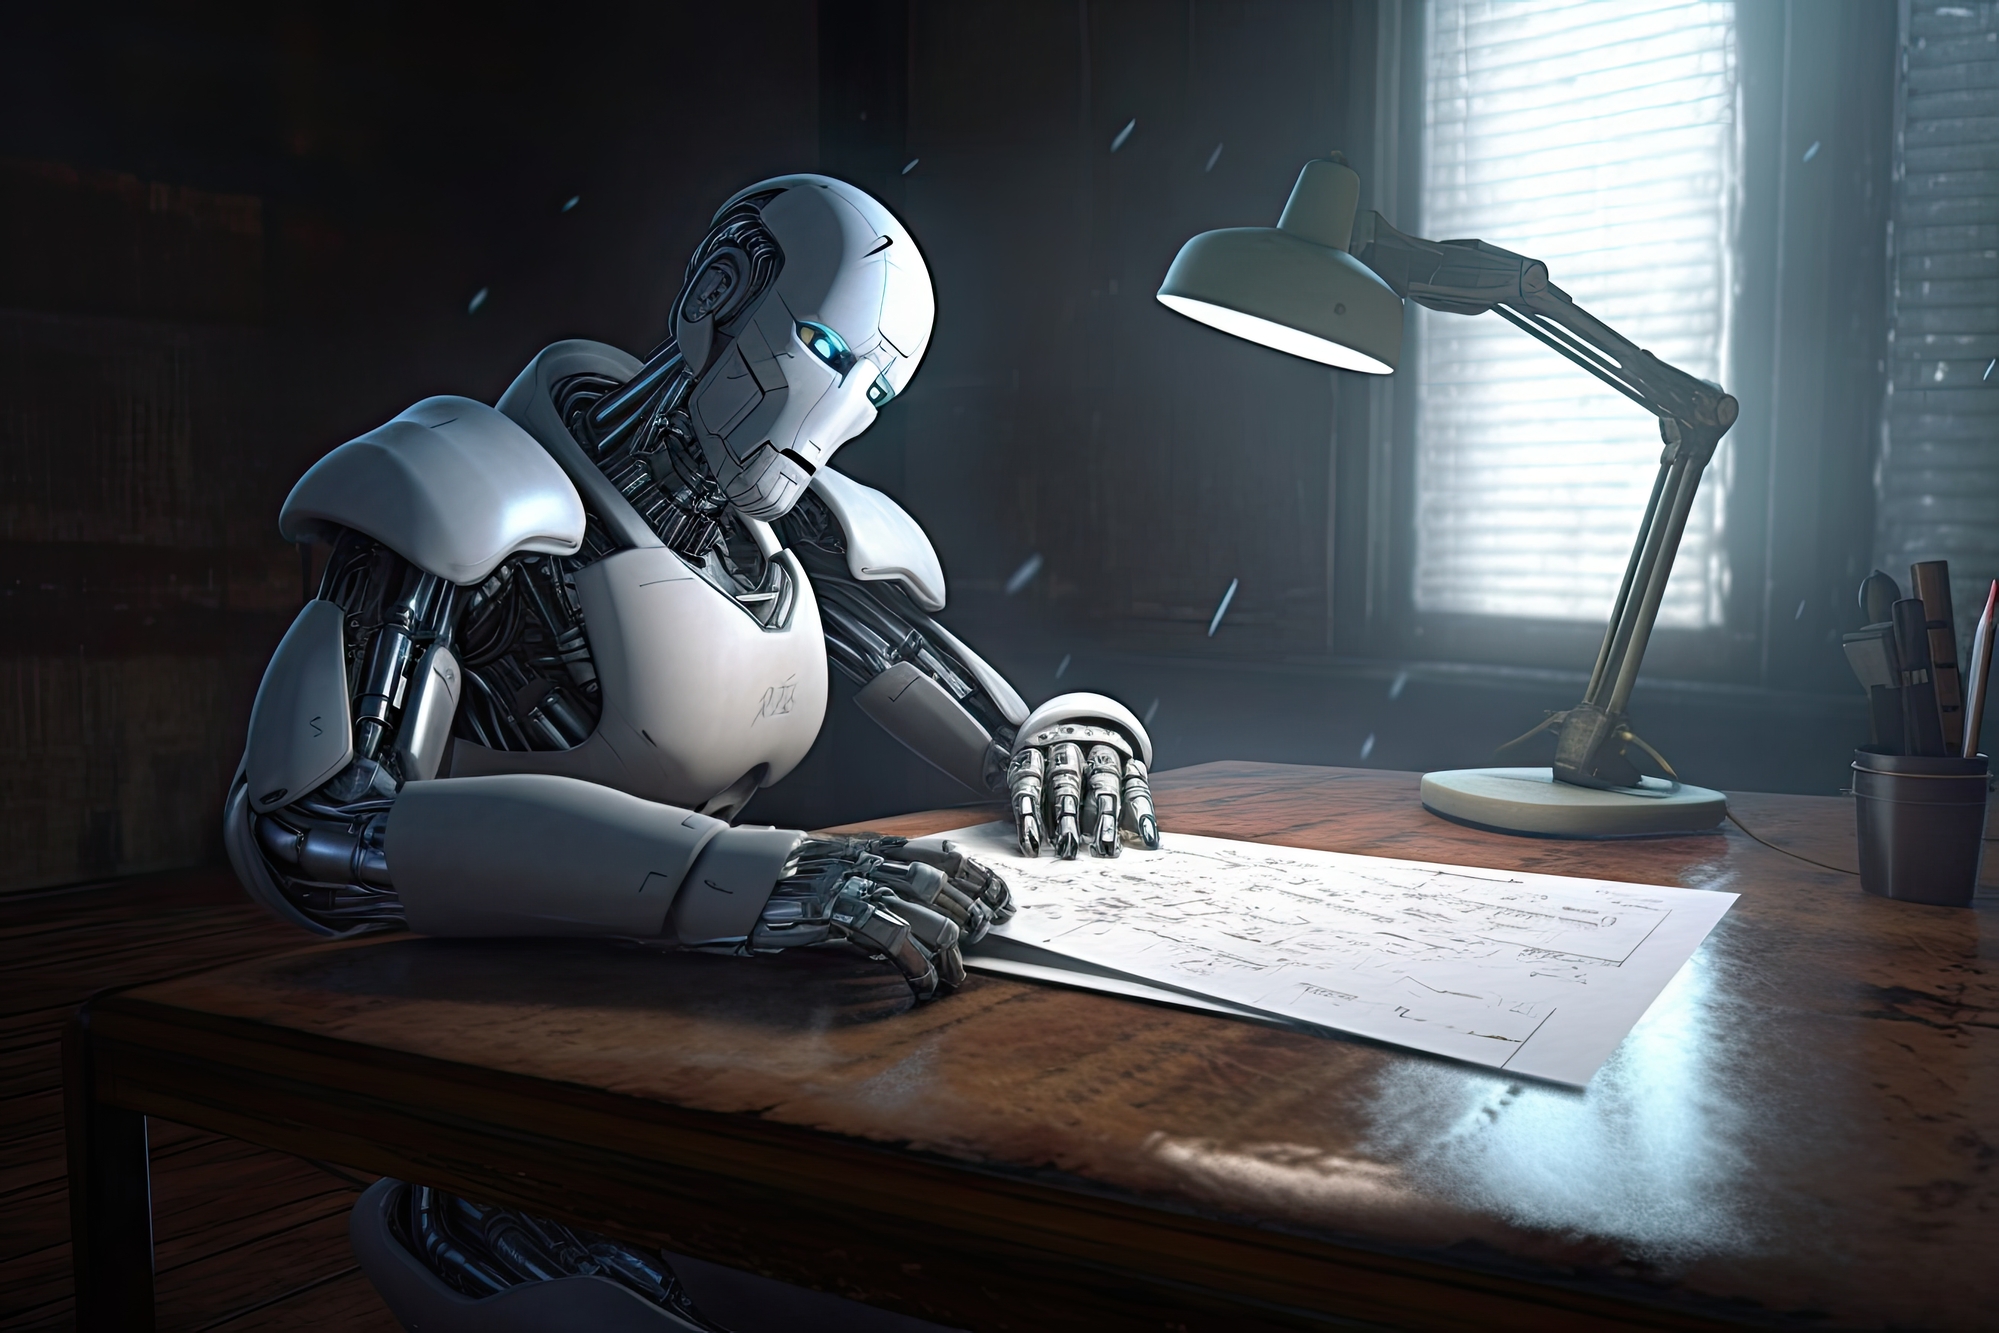 Chatgpt writing assistance, the robot sits at the table and writes